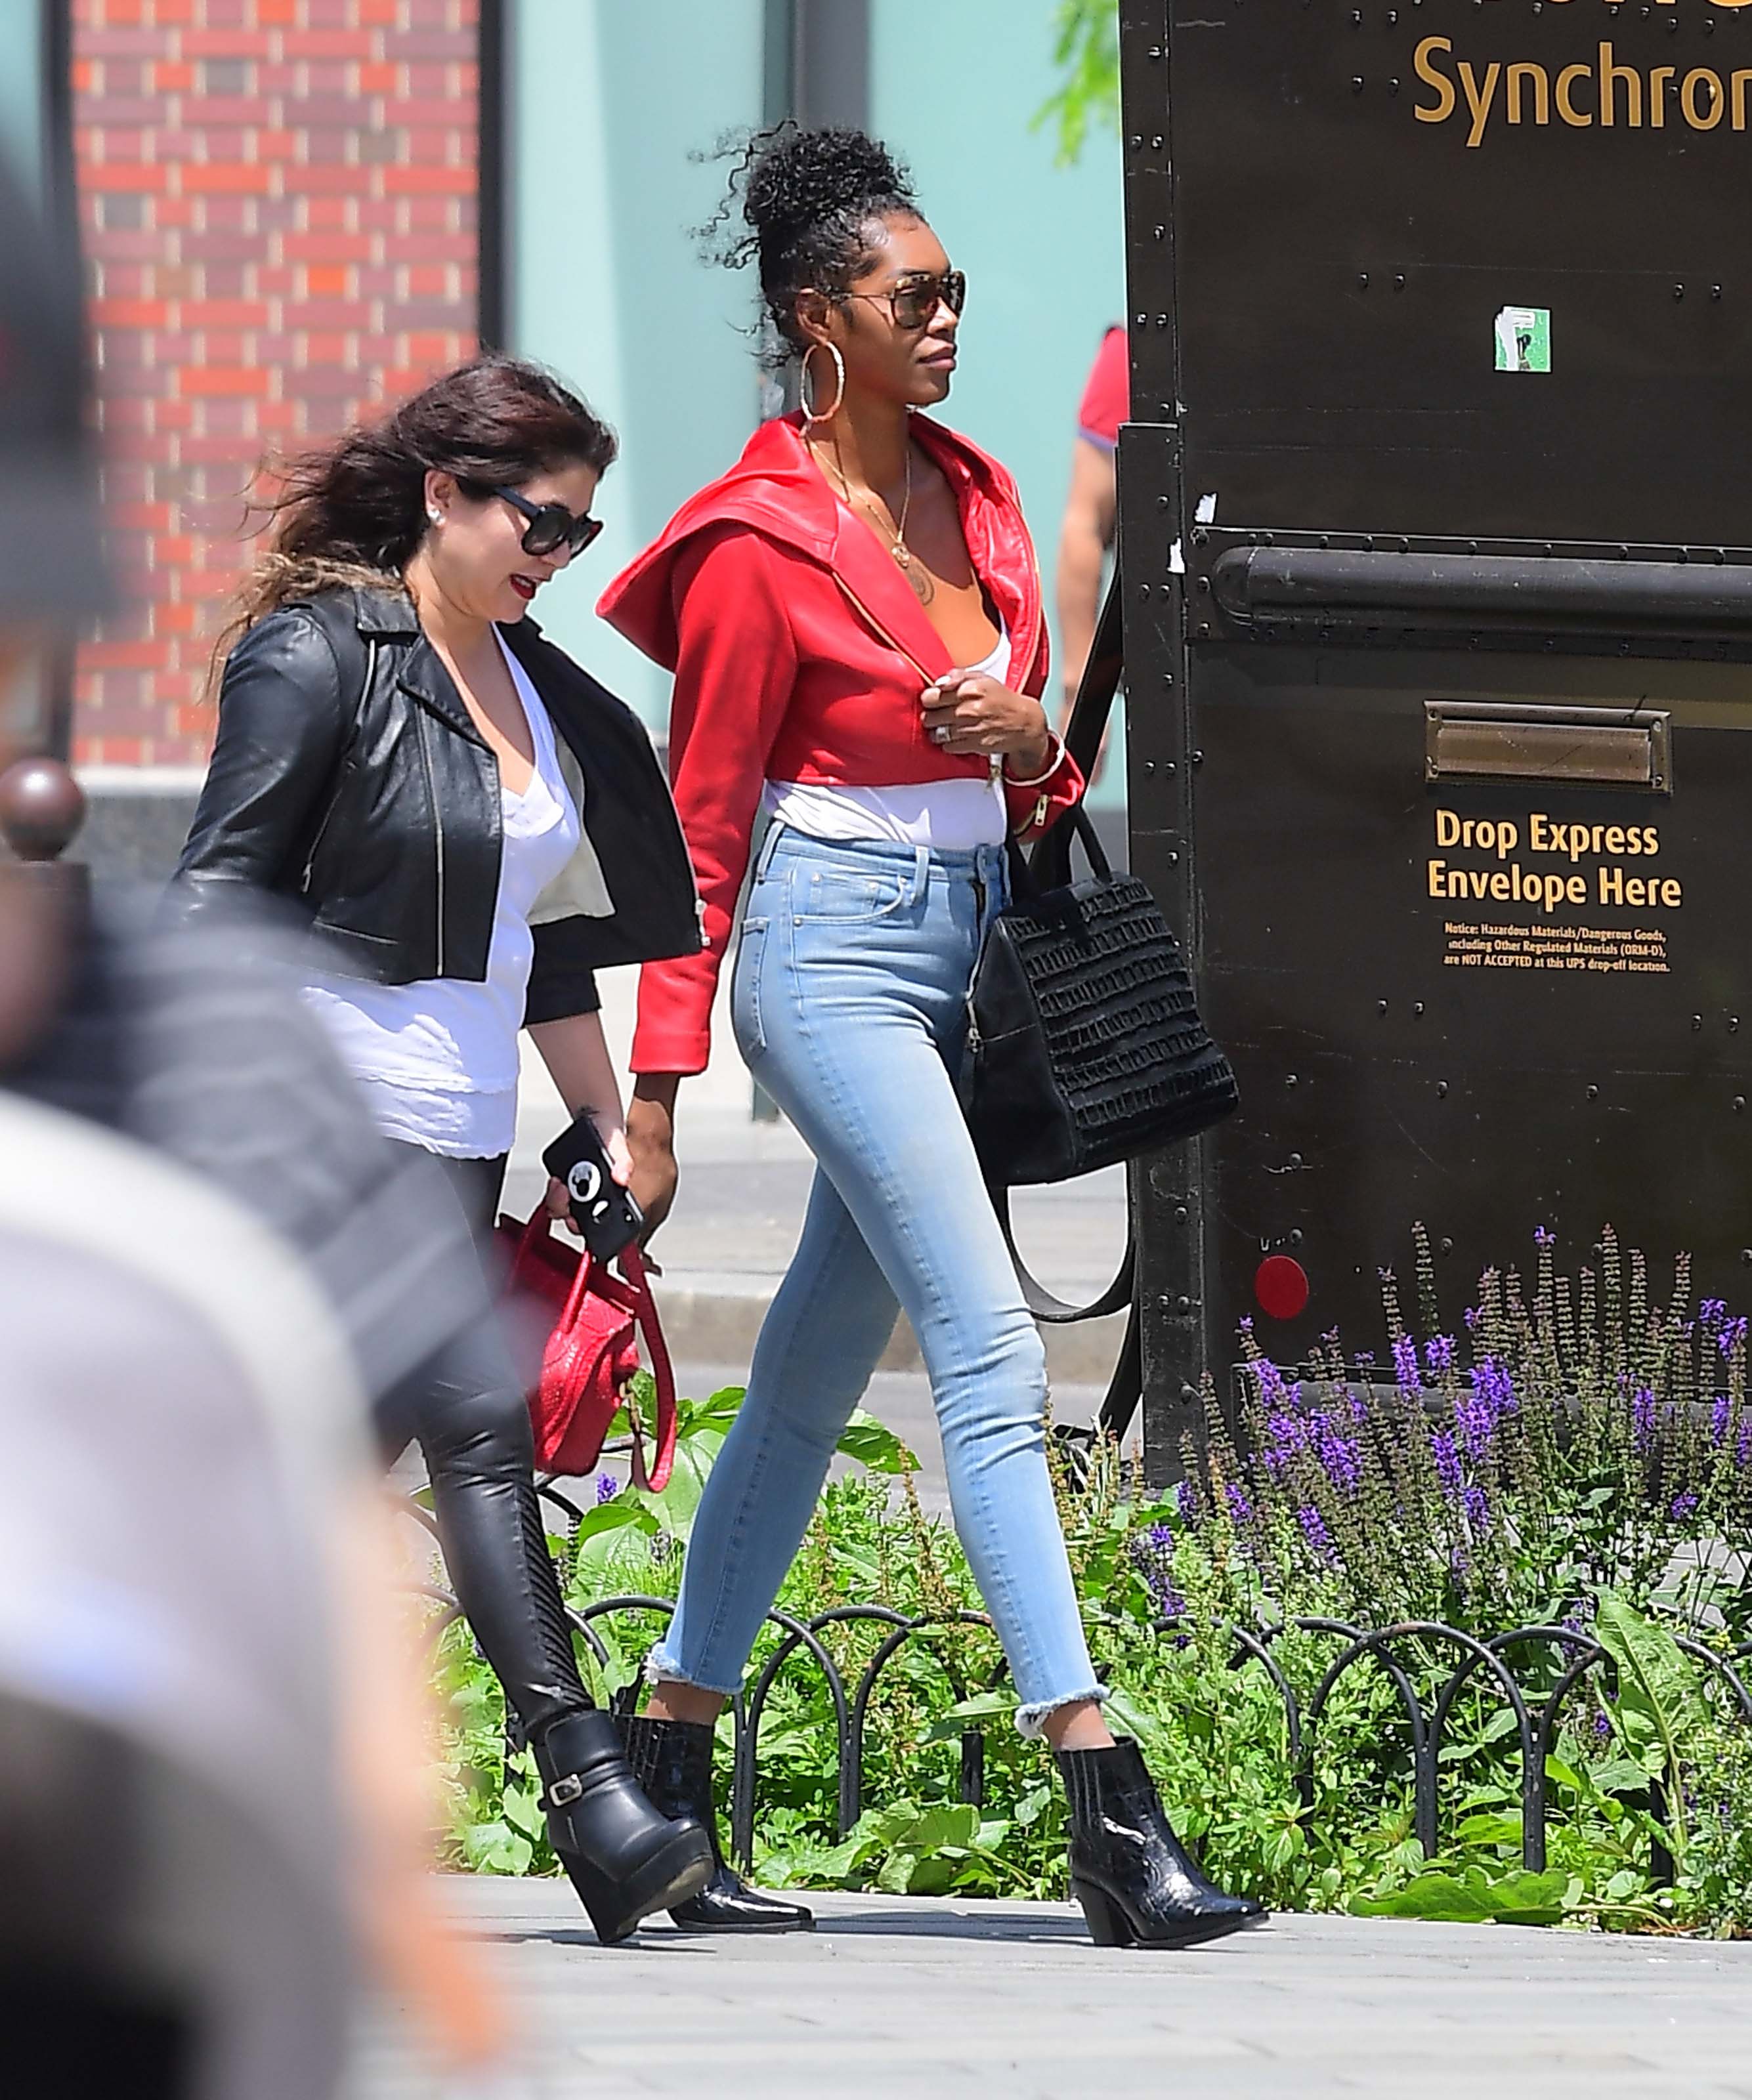 Jessica White steps out in NYC